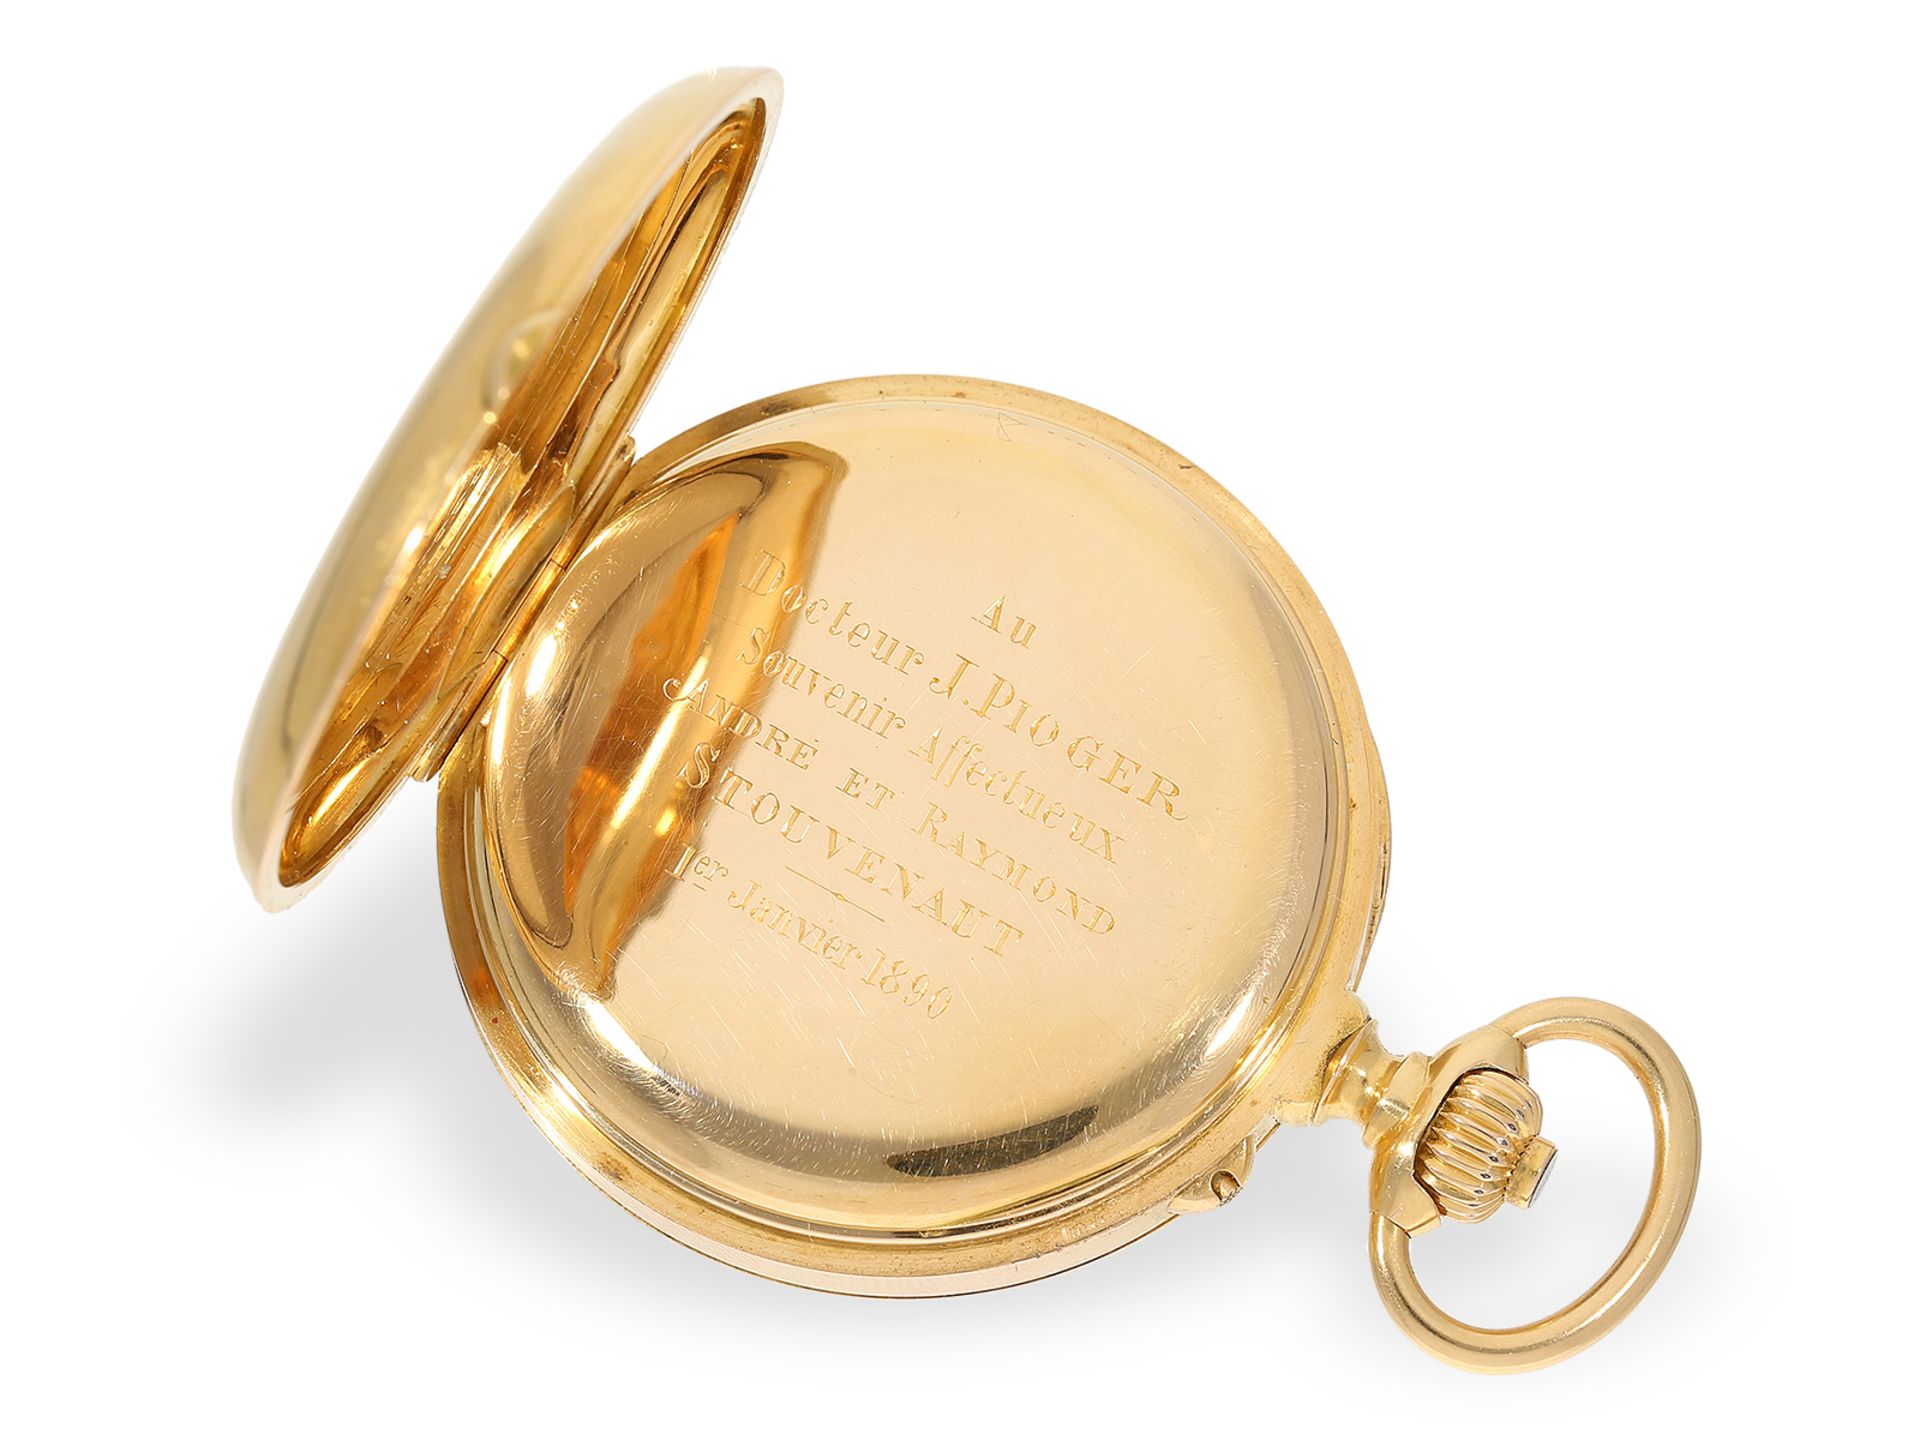 Pocket watch: important Le Roy chronometer with chronograph and central counter, No.57137-3601, ca. - Image 3 of 6